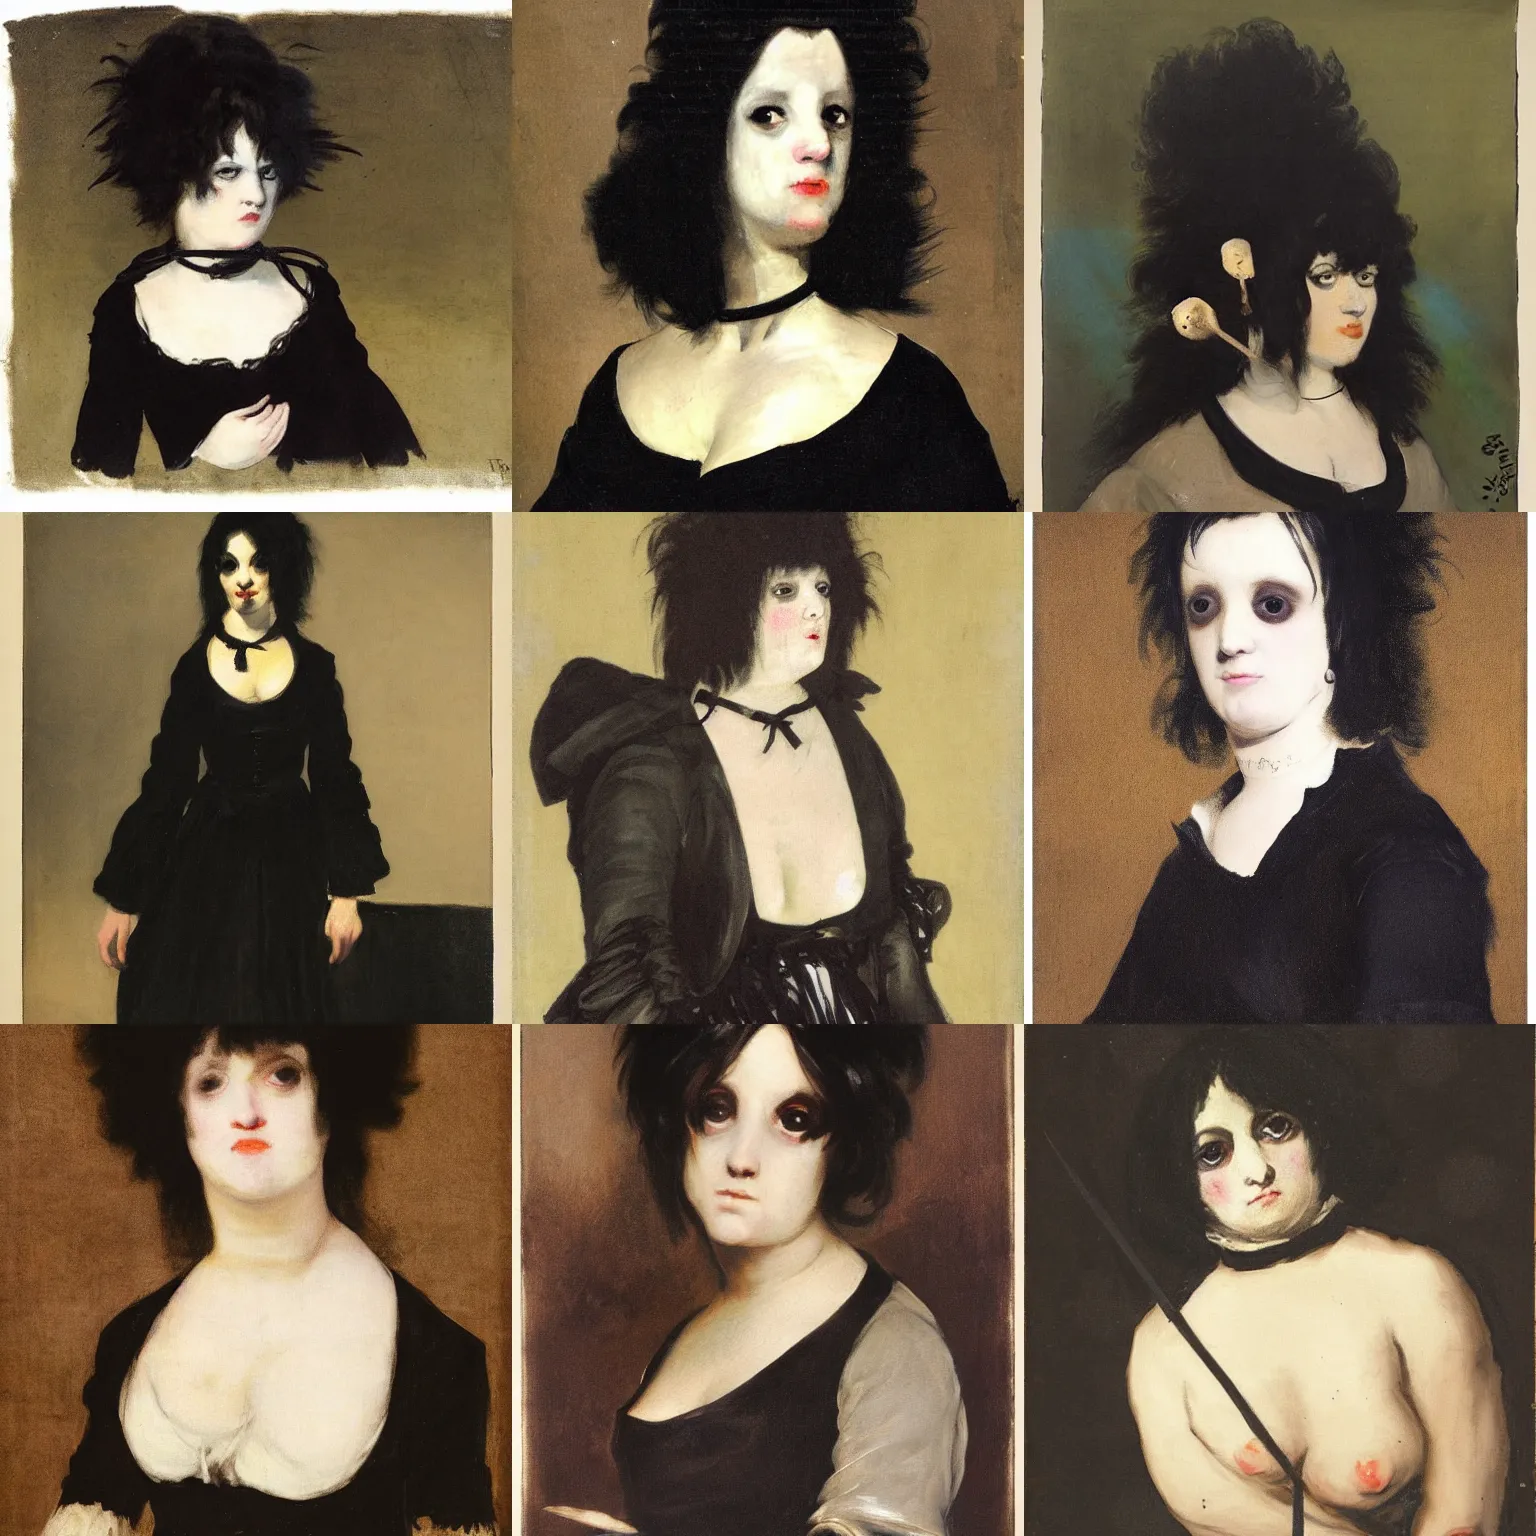 Prompt: A goth painted by Francisco Goya. Her hair is dark brown and cut into a short, messy pixie cut. She has a slightly rounded face, with a pointed chin, large entirely-black eyes, and a small nose. She is wearing a black tank top, a black leather jacket, a black knee-length skirt, a black choker, and black leather boots.